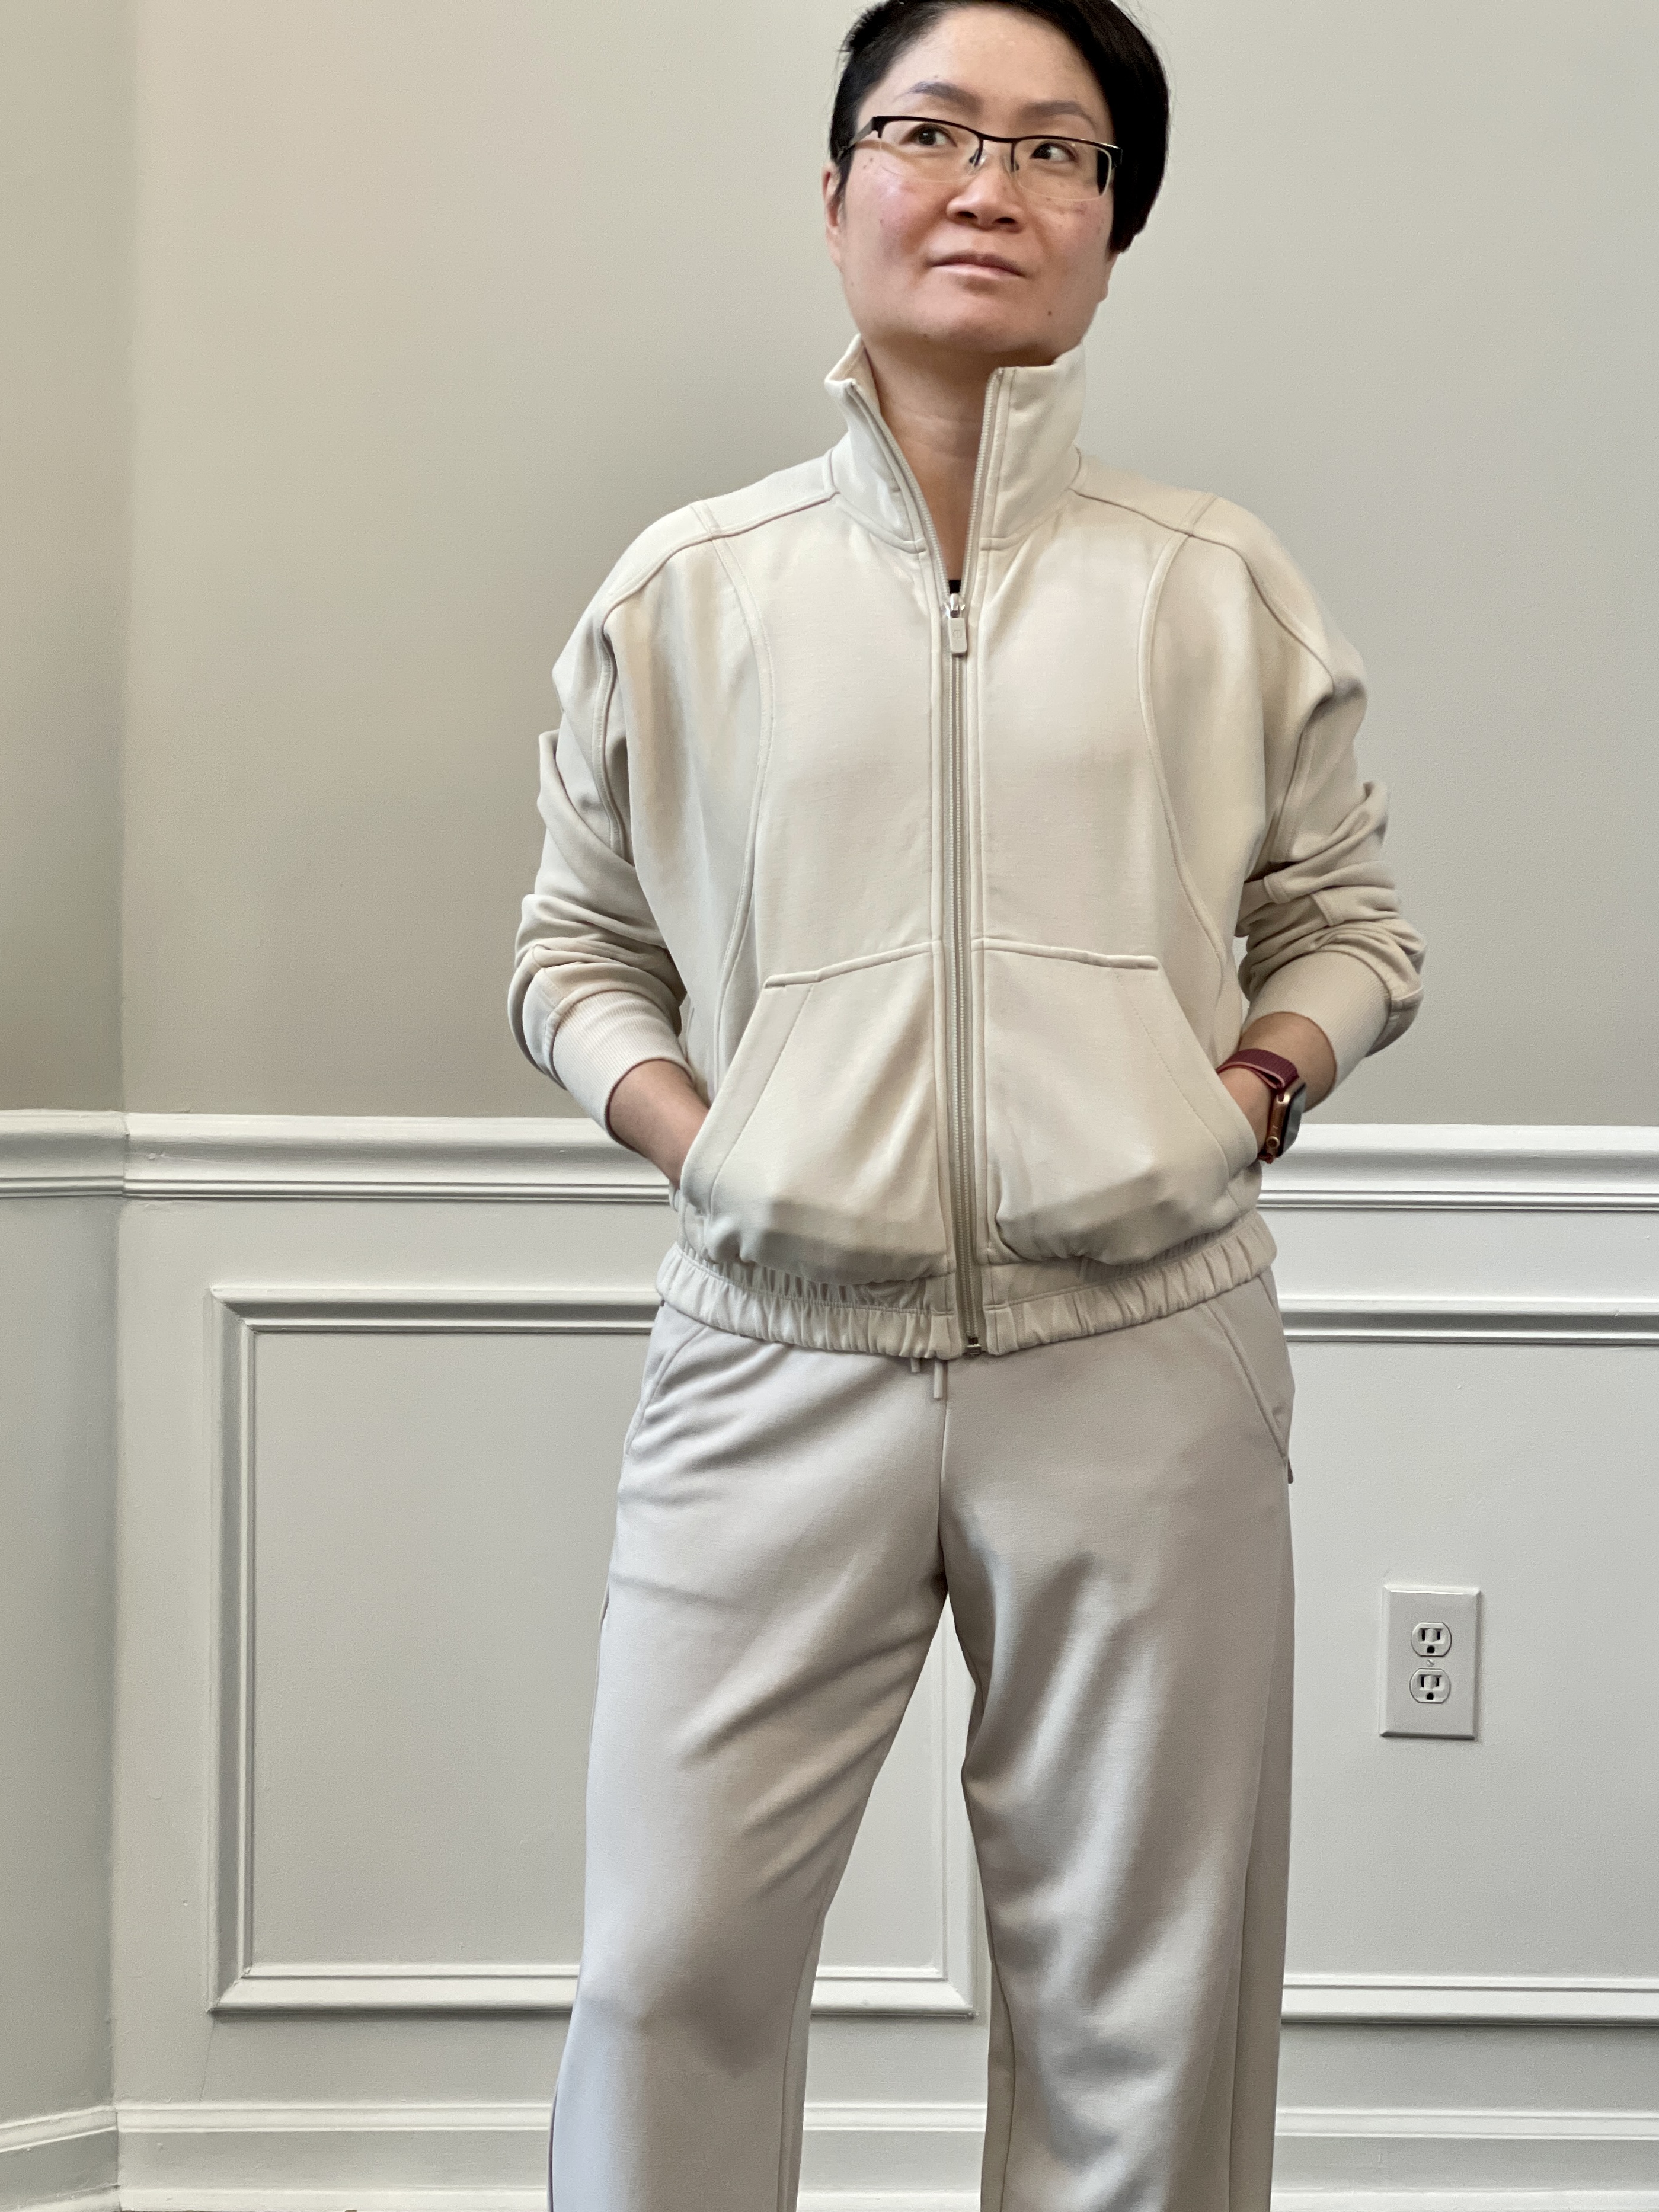 Fit Review Friday! Brushed Softstreme Funnel-Neck Zip Up + Throw